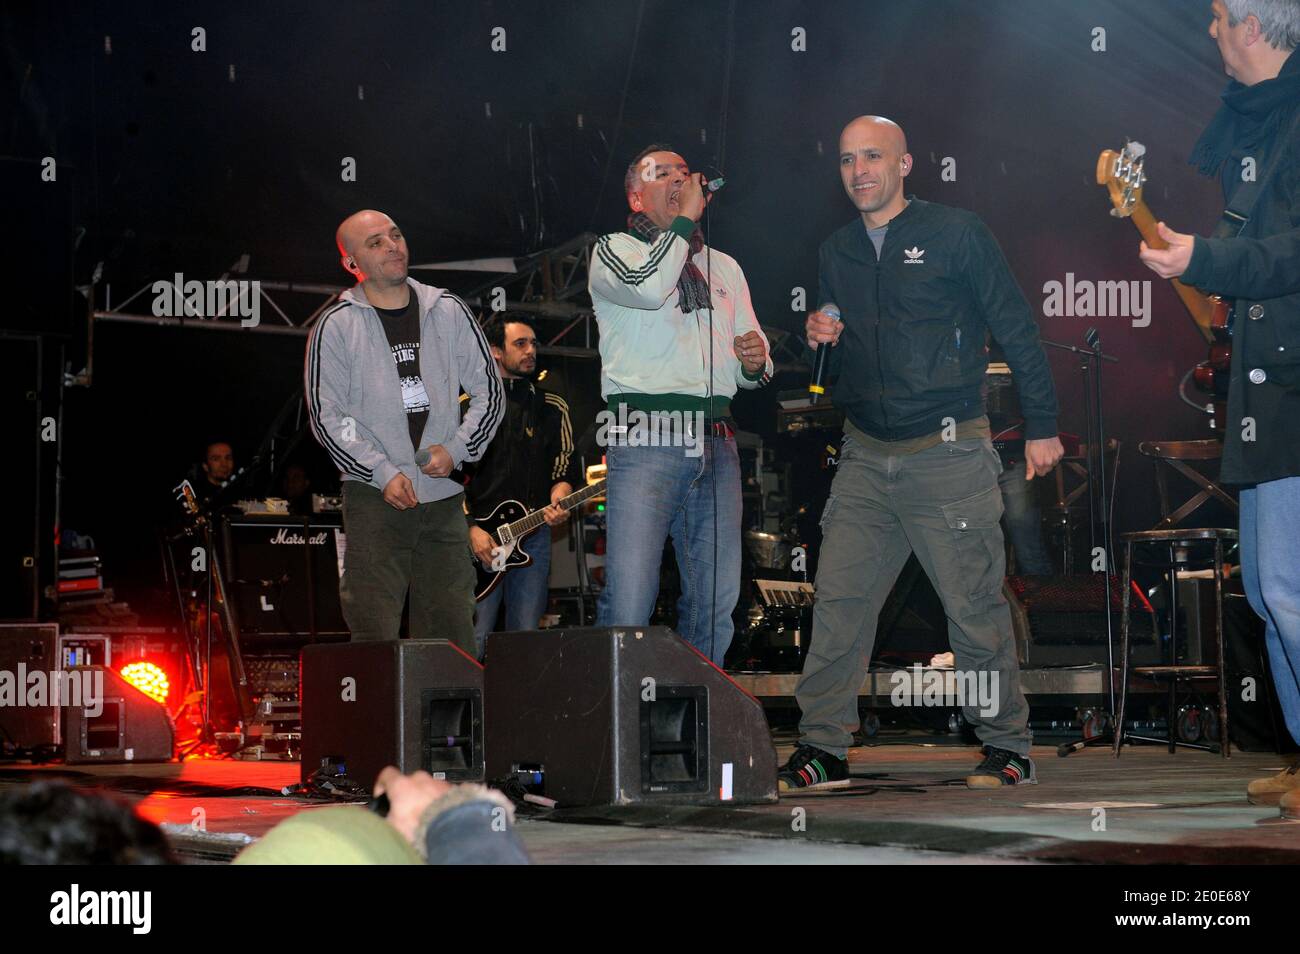 French group Zebda members (L-R : Hakim Amokrane, Majid Cherfi and Mouss Amokrane) seen on stage as they participate in a concert to support Florange Arcelor Mittal steel workers as they arrive in Paris, France on April 6, 2012, after a 350 kilometers walk, from their factory in Florange to the French capital. Photo by Ammar Abd Rabbo/ABACAPRESS.COM Stock Photo